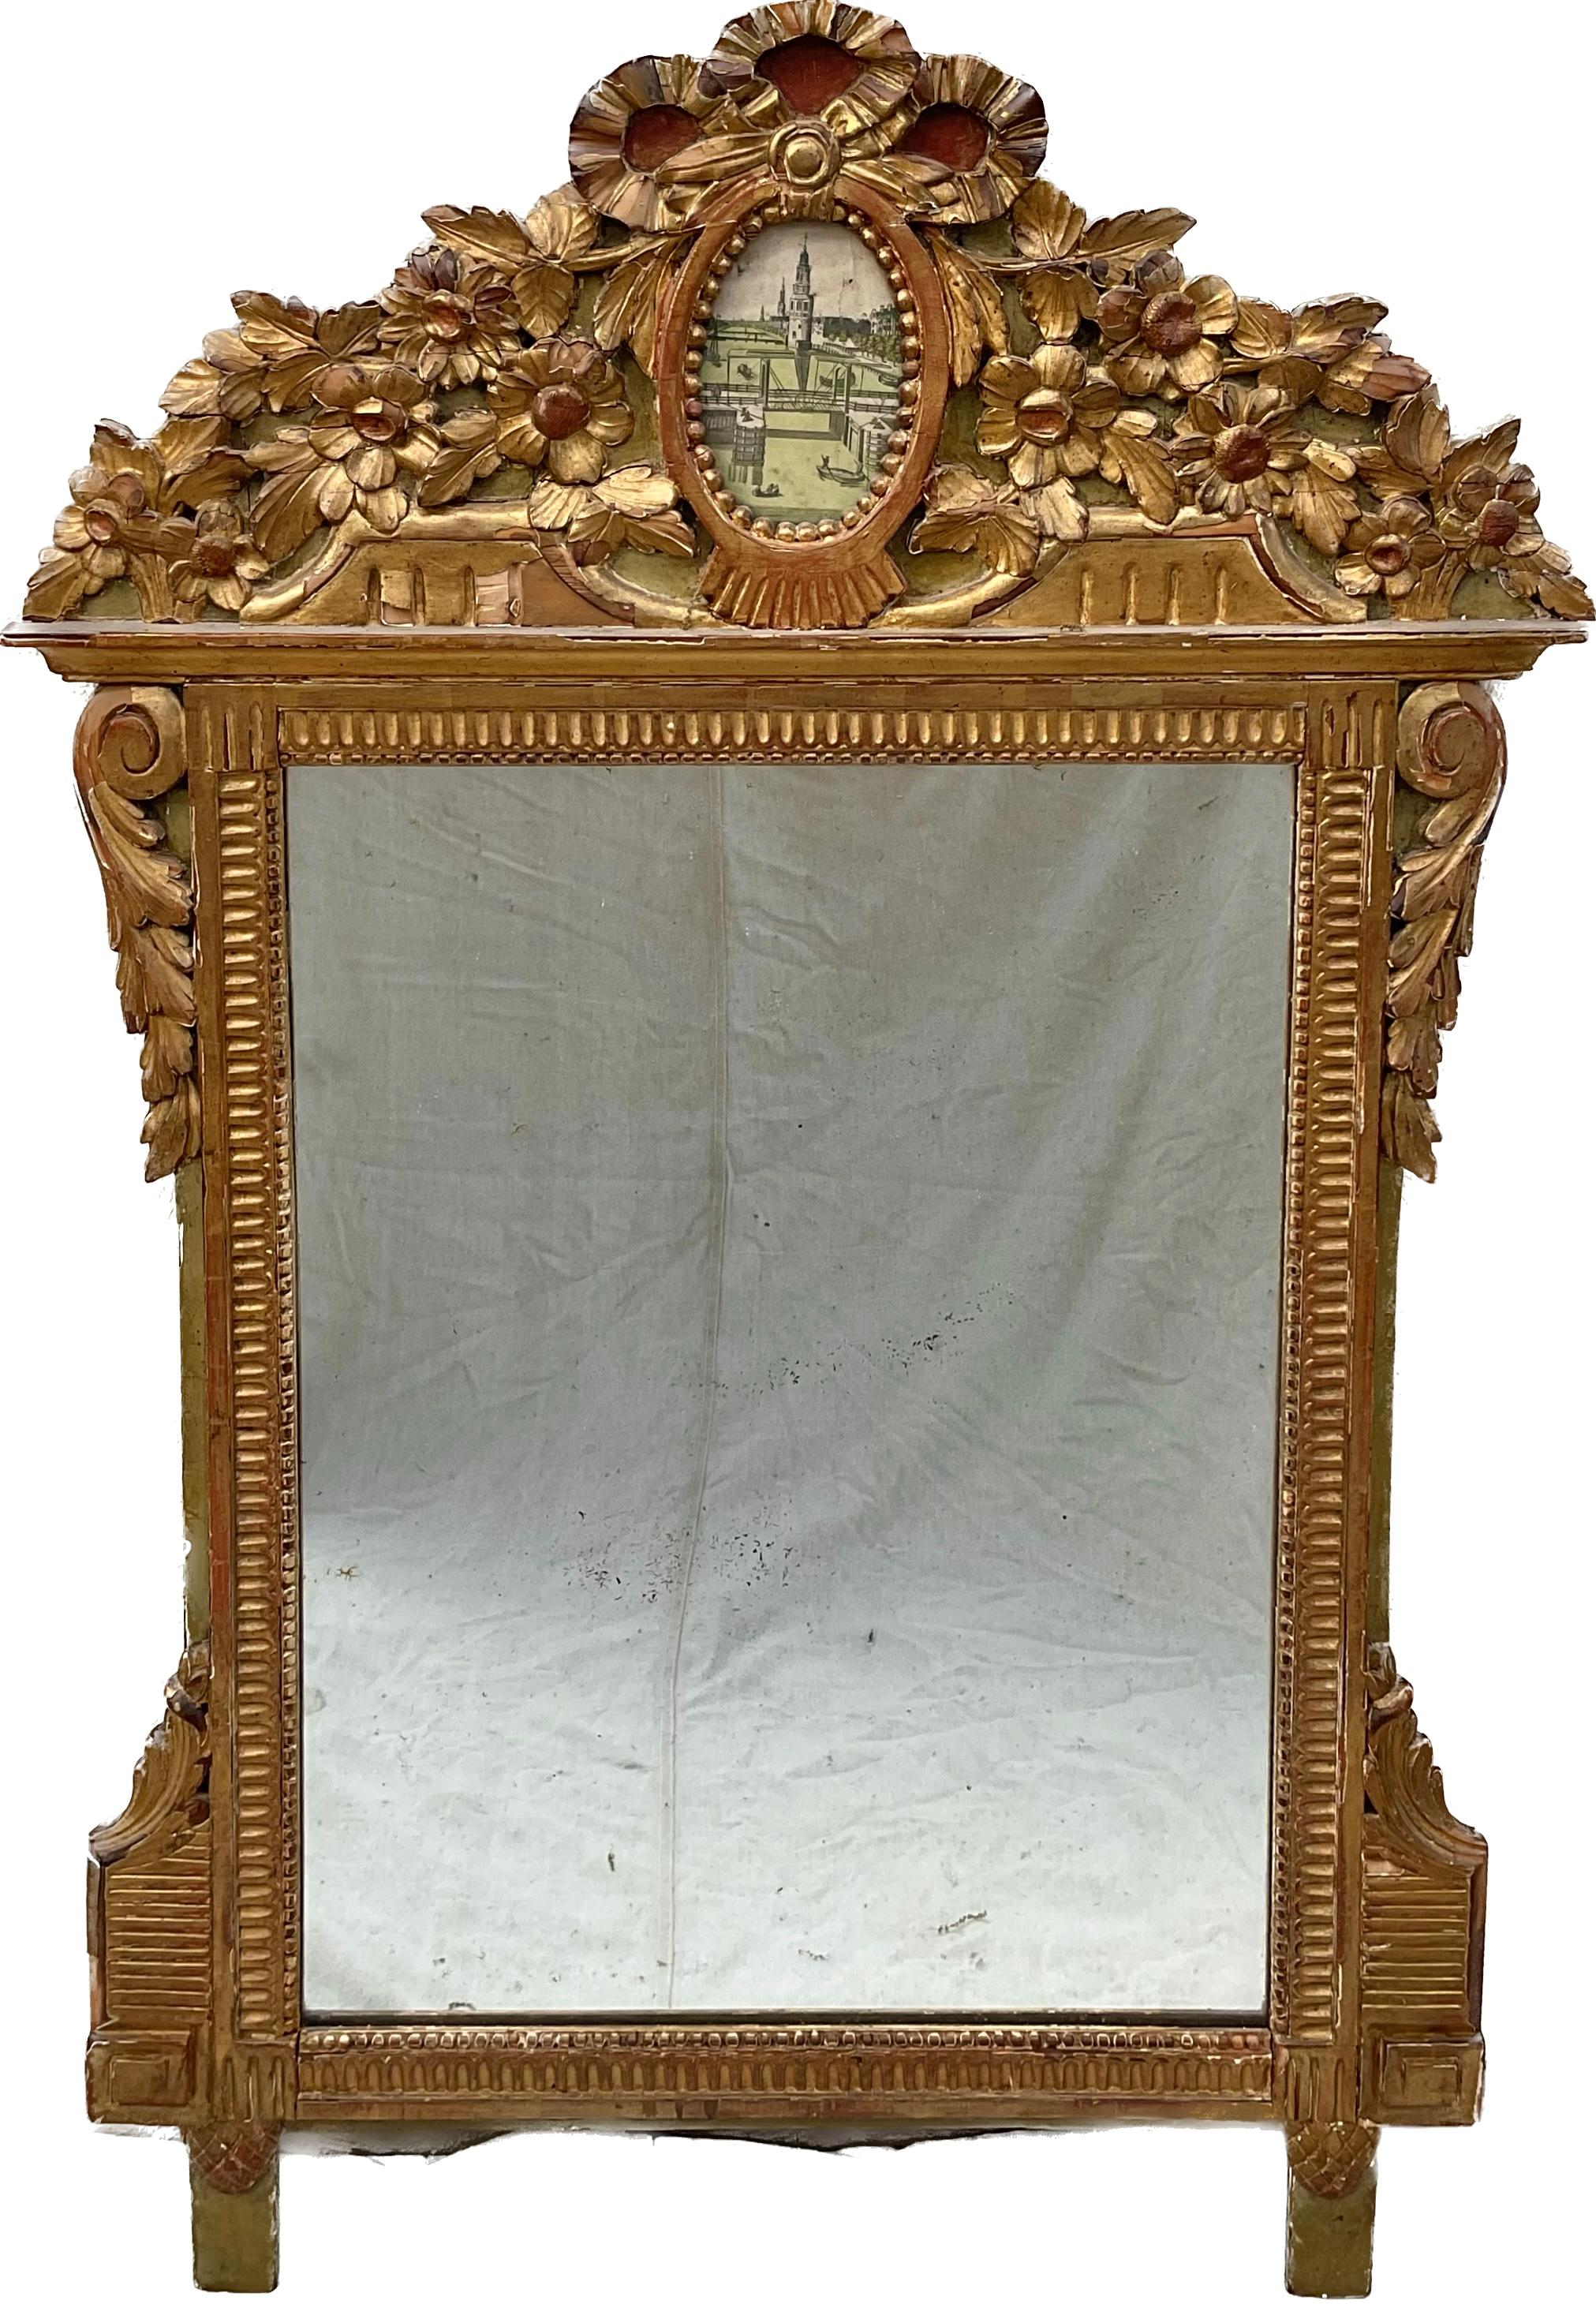 This elegant, 18th century Louis XVI Mirror would make a charming addition to any interior decor. Crafted in Southern France, circa 1780, the mirror is heavily carved and exemplifies the design elements of the Rococo and Baroque style. The pediment